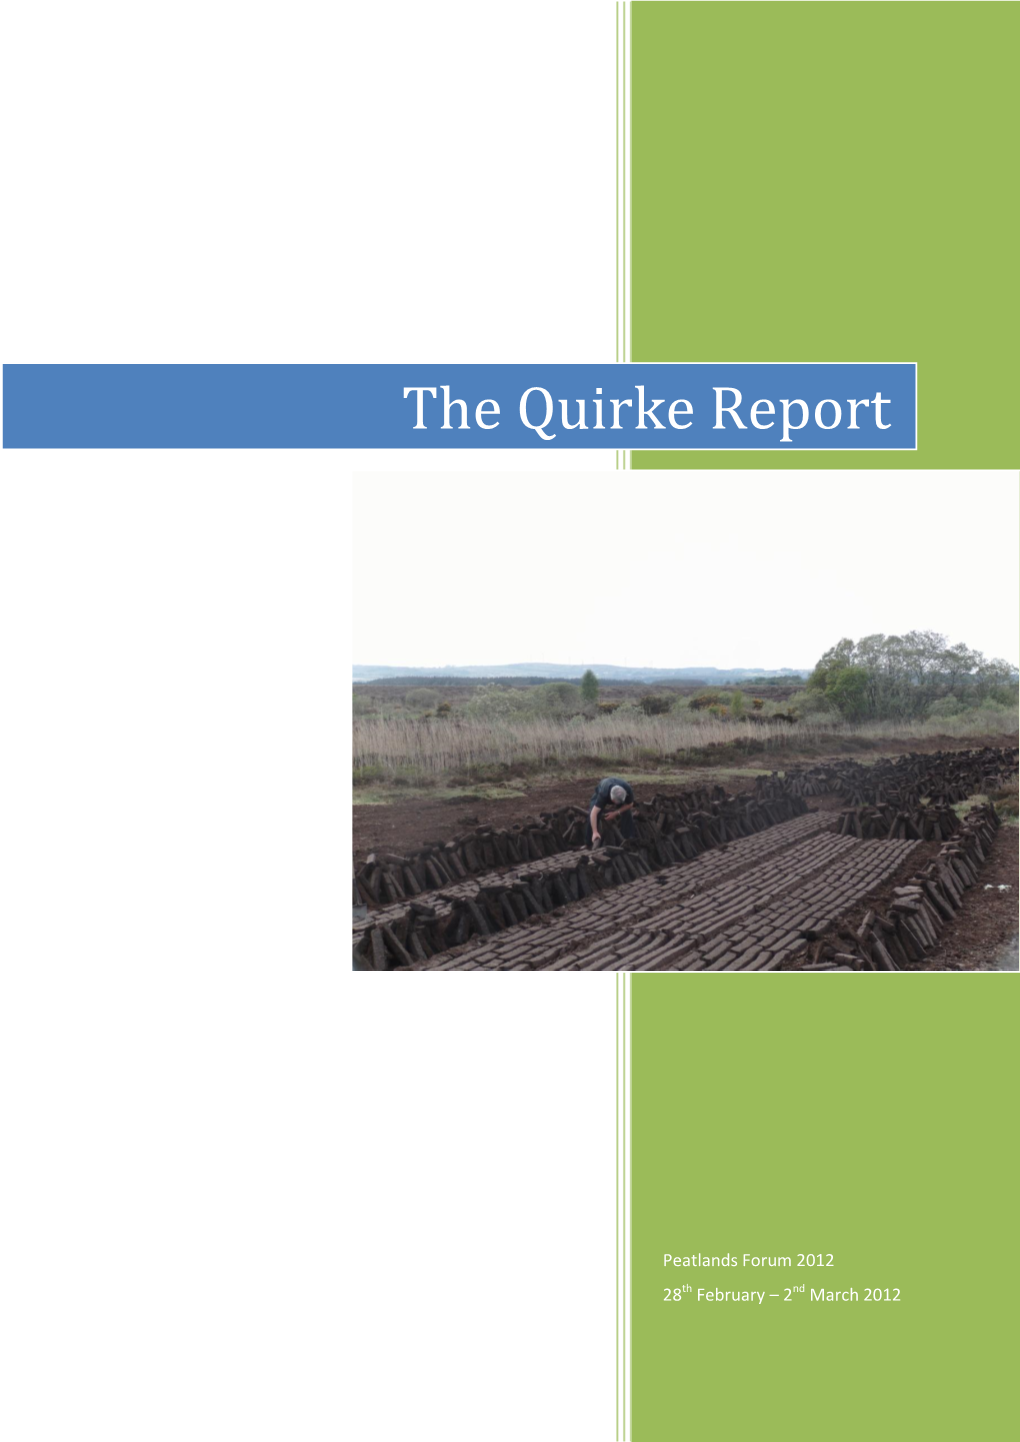 The Quirke Report